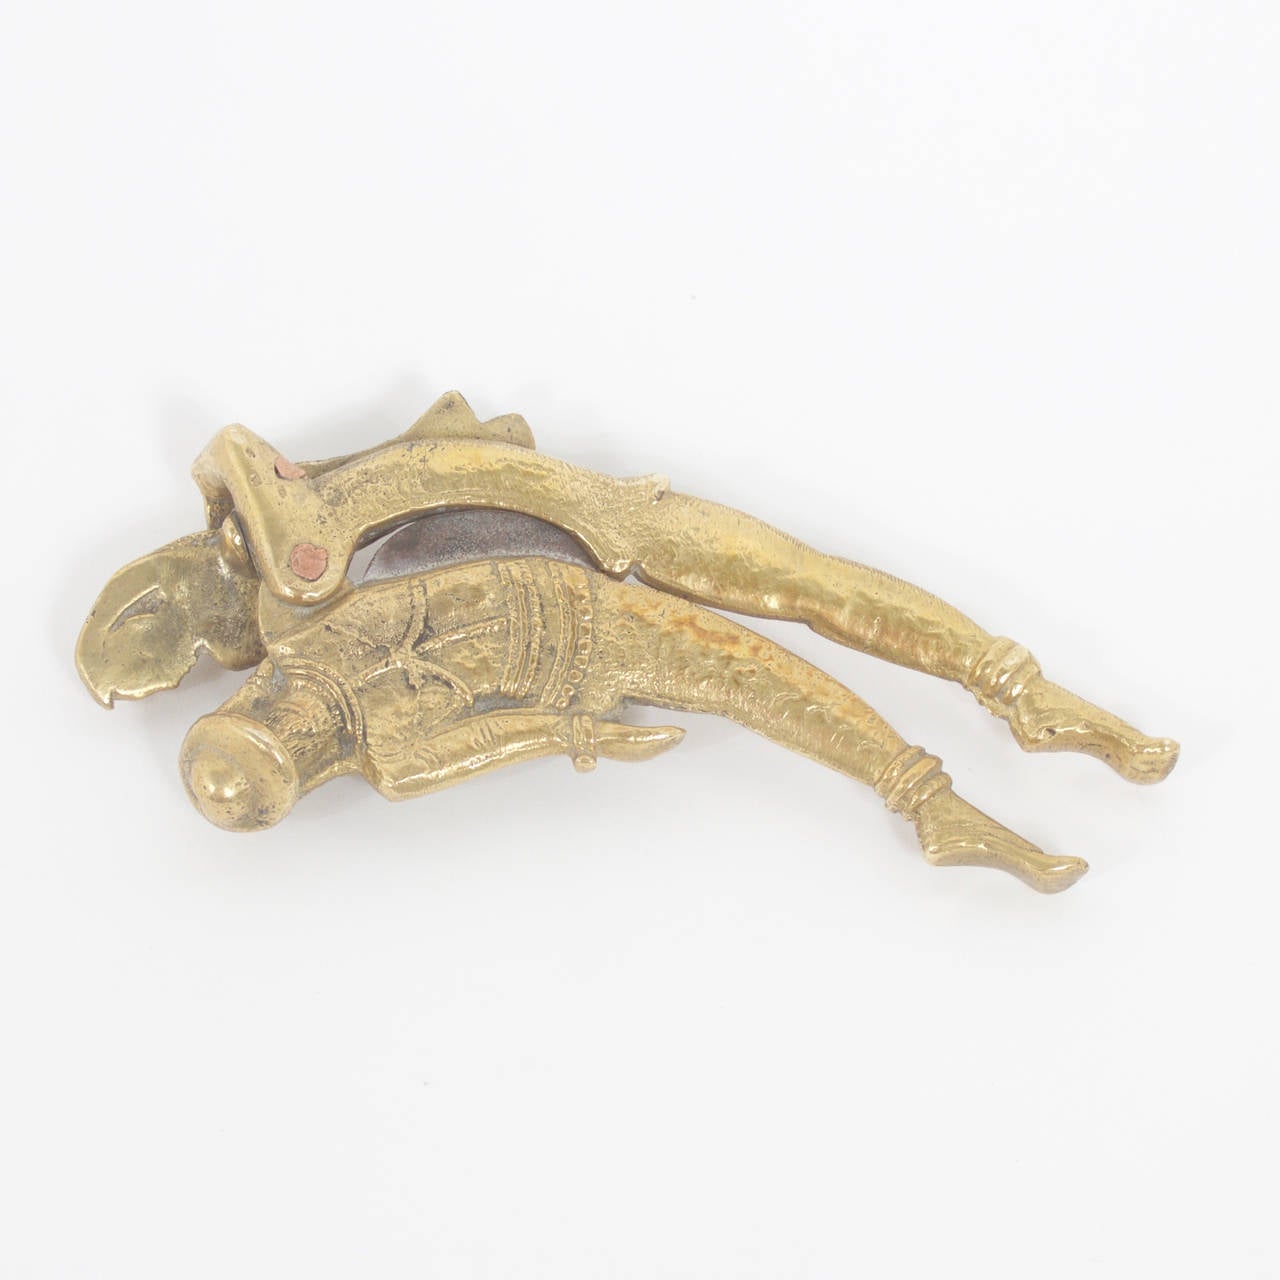 As if flying with a muse this Antique Indian cast brass cigar cutter fits into a flight of fancy. Form is meeting function in a dance for the ages. Add this one to your collection or just enjoy this object of art.